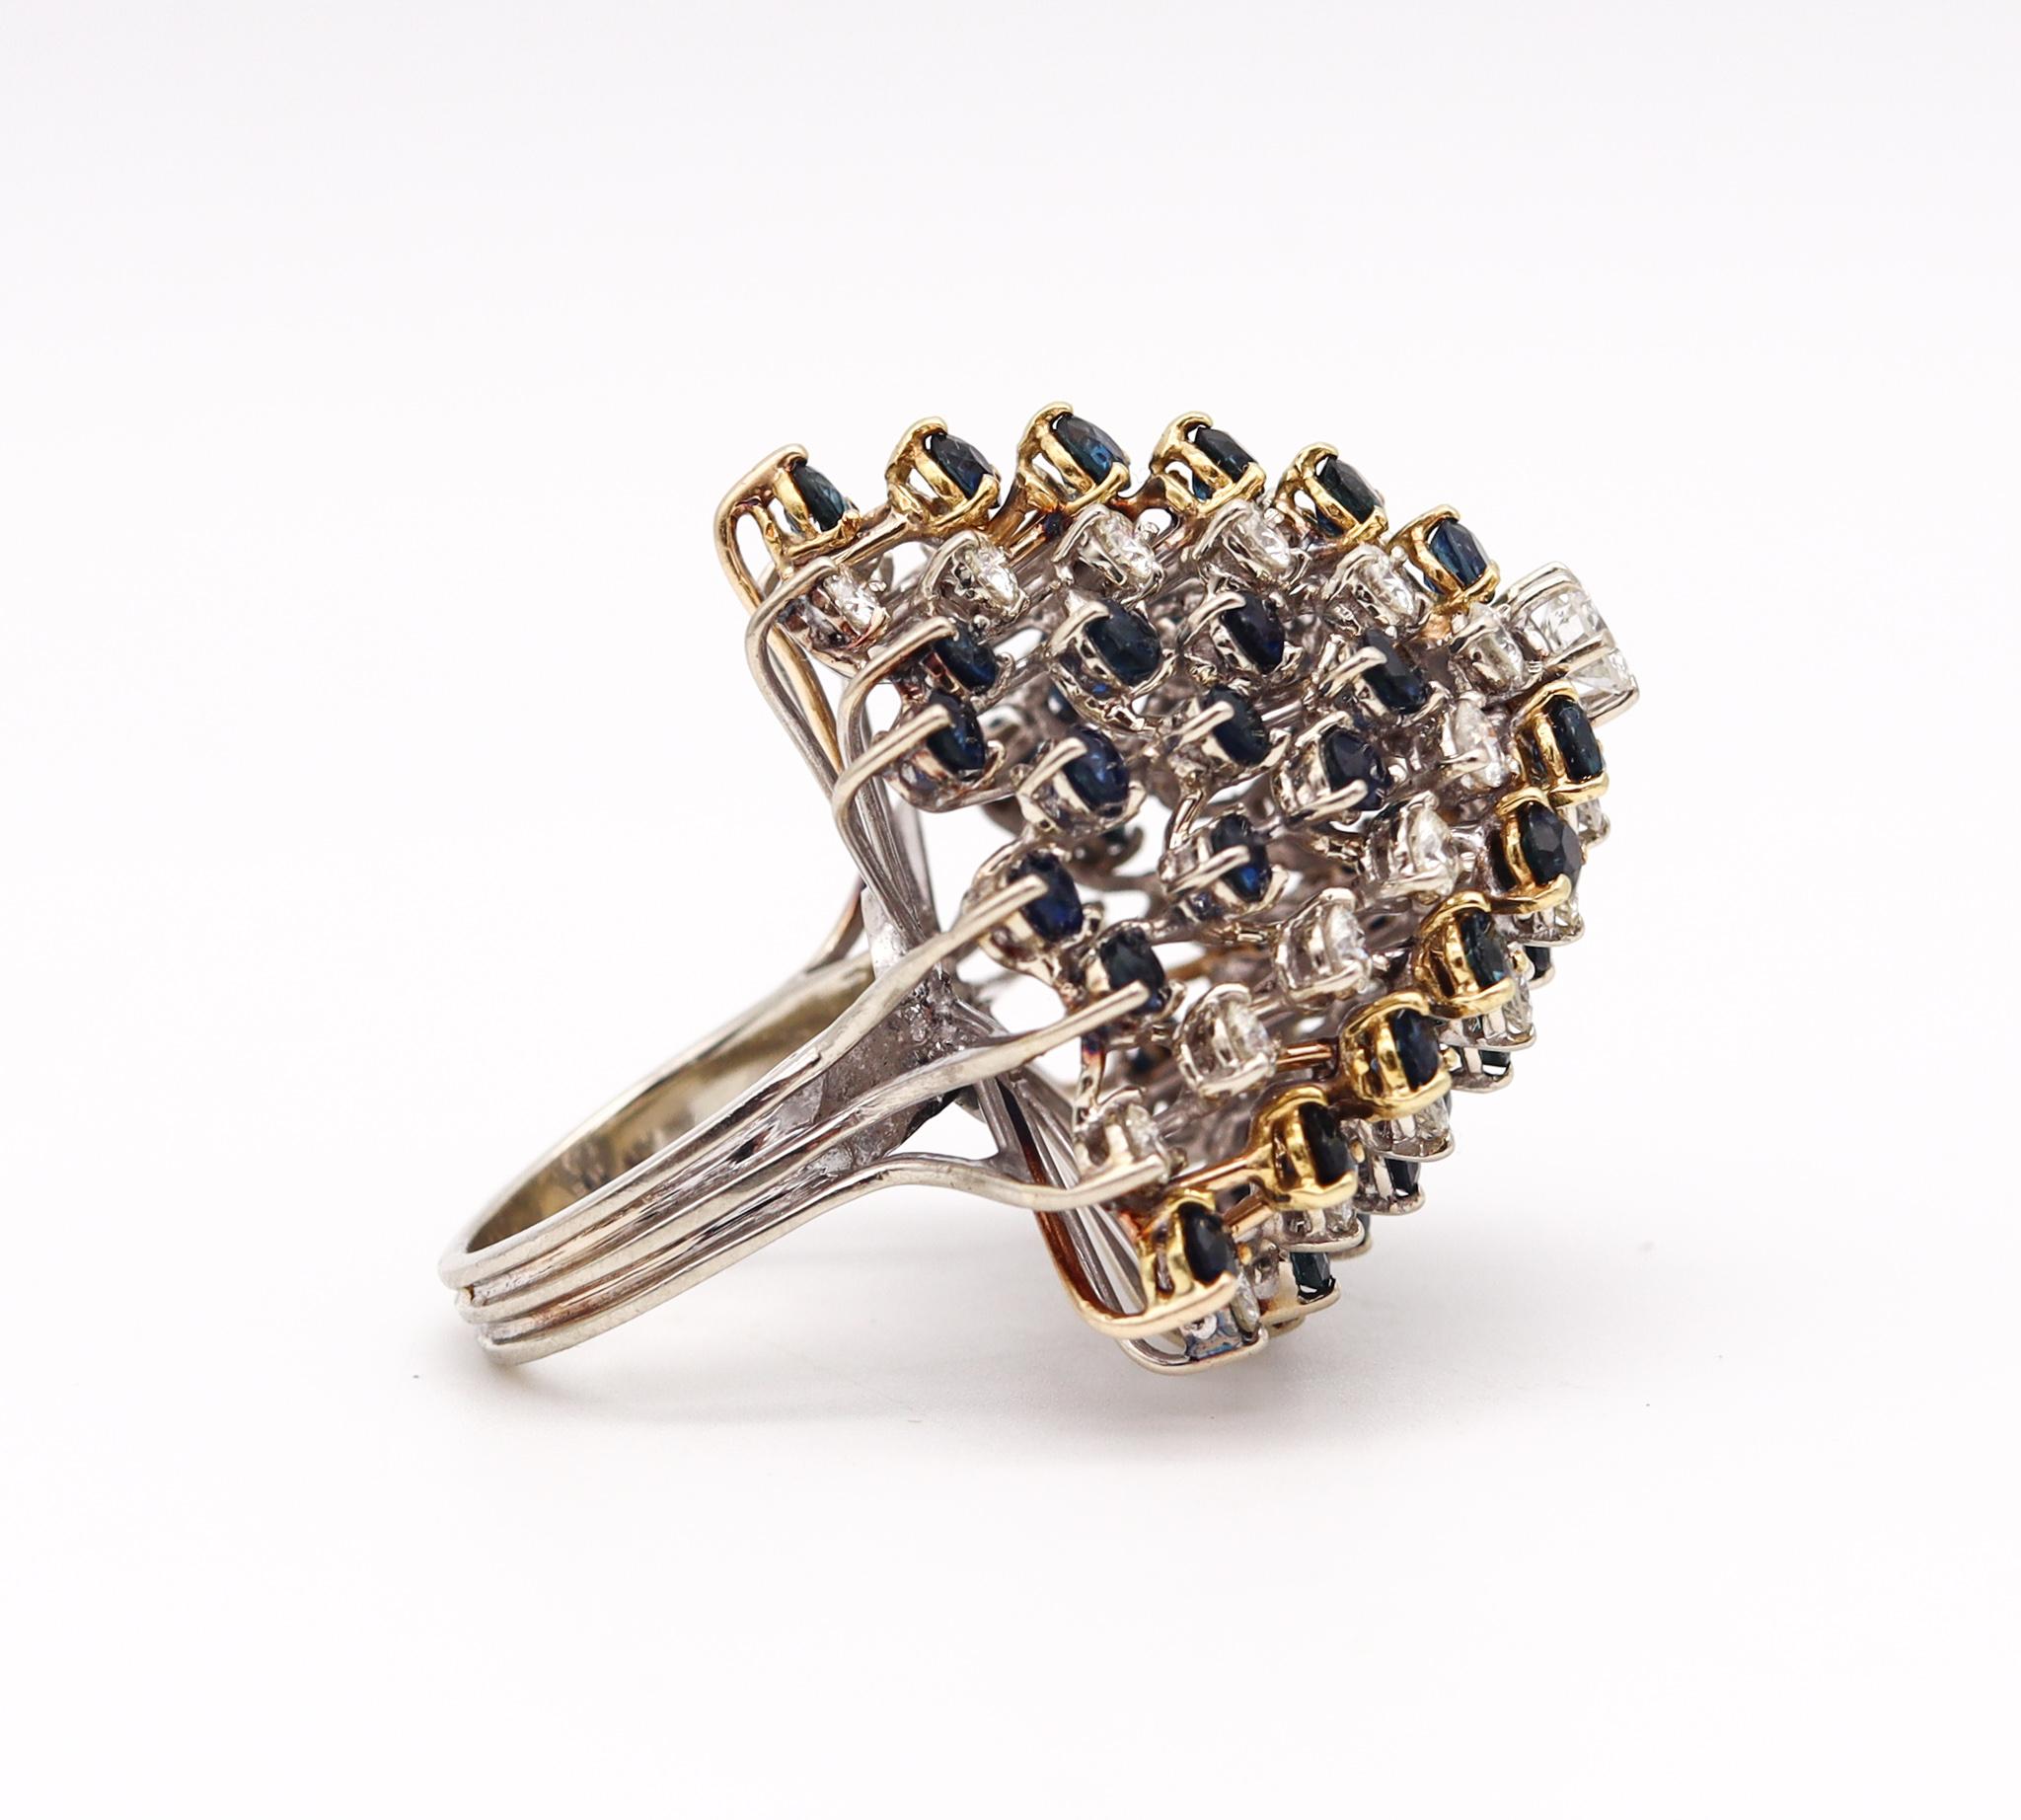 Retro Modernist 1970 Cluster Cocktail Ring 14kt Gold with 10.36 Ctw Diamonds Sapphires For Sale